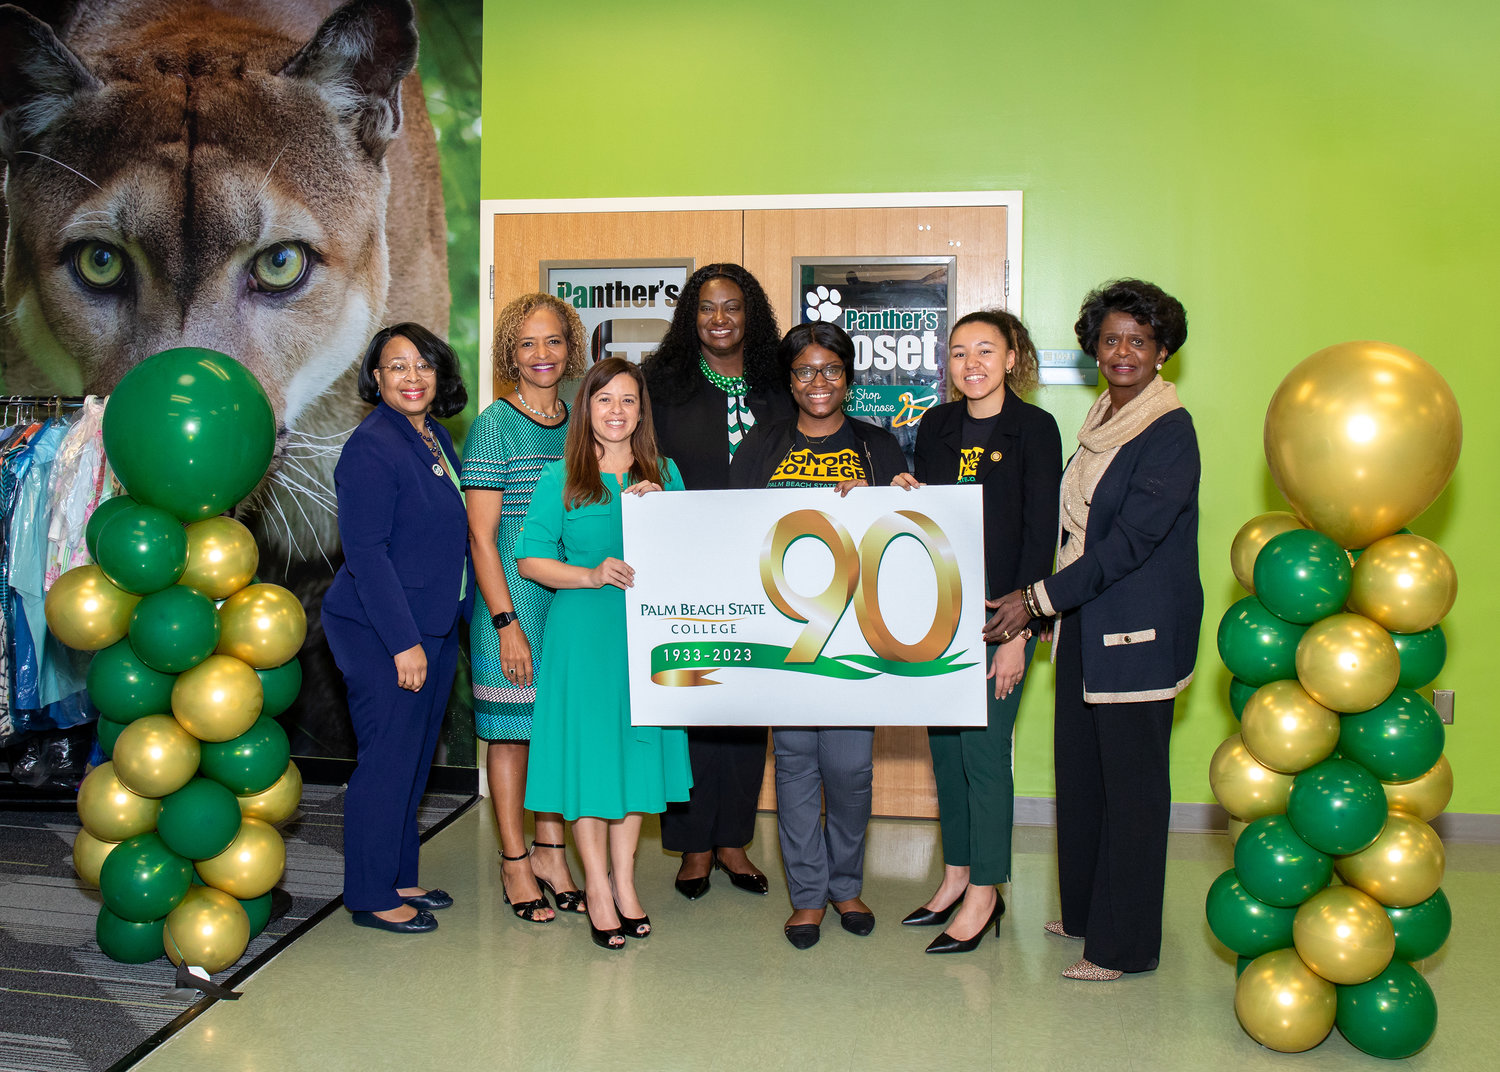 Tunjarnika Coleman-Ferrell, Ed.D., vice president of academic affairs; President Ava L. Parker, J.D., Marcella Montesinos, Honors College director, LaTanya McNeal, executive dean of the PBSC Belle Glade campus, Alumna Aliyah Blake, Student Trustee Lorena Martin Reyes and Trustee Carolyn L. Williams celebrate the opening of the College’s third Panther’s Pantry.